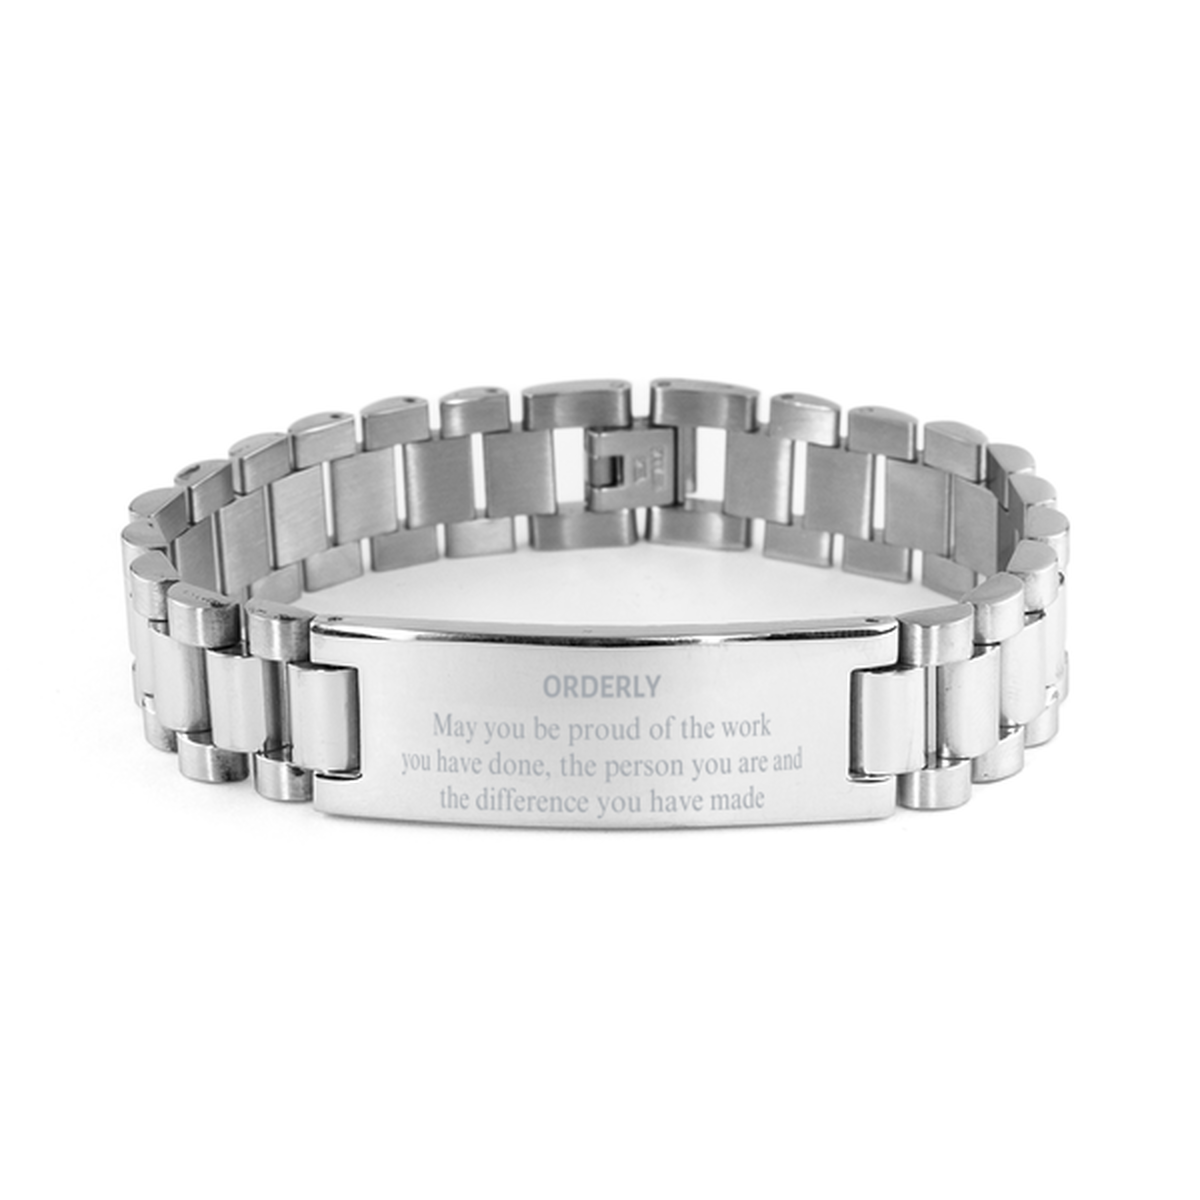 Orderly May you be proud of the work you have done, Retirement Orderly Ladder Stainless Steel Bracelet for Colleague Appreciation Gifts Amazing for Orderly